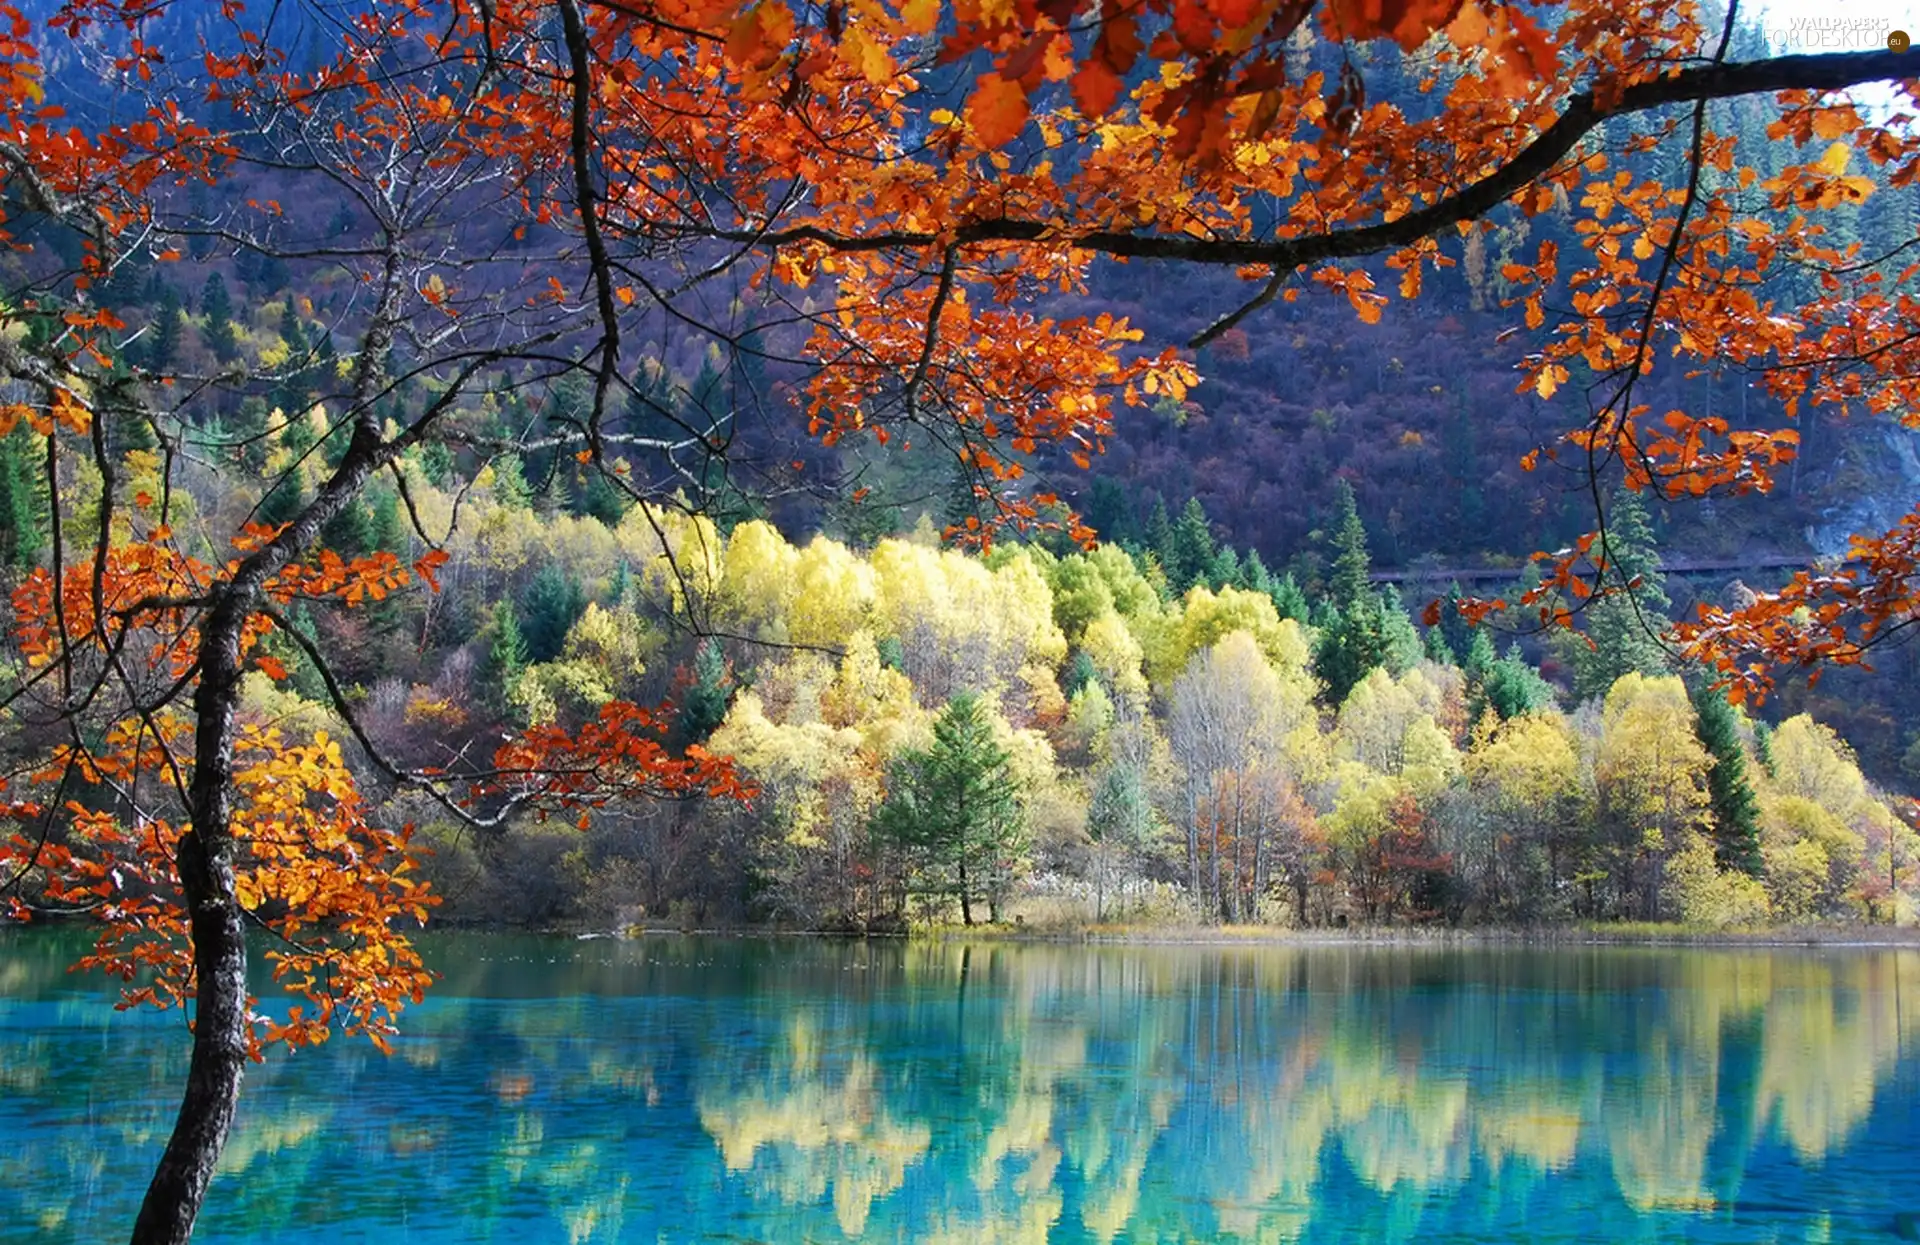 reflection, viewes, autumn, trees